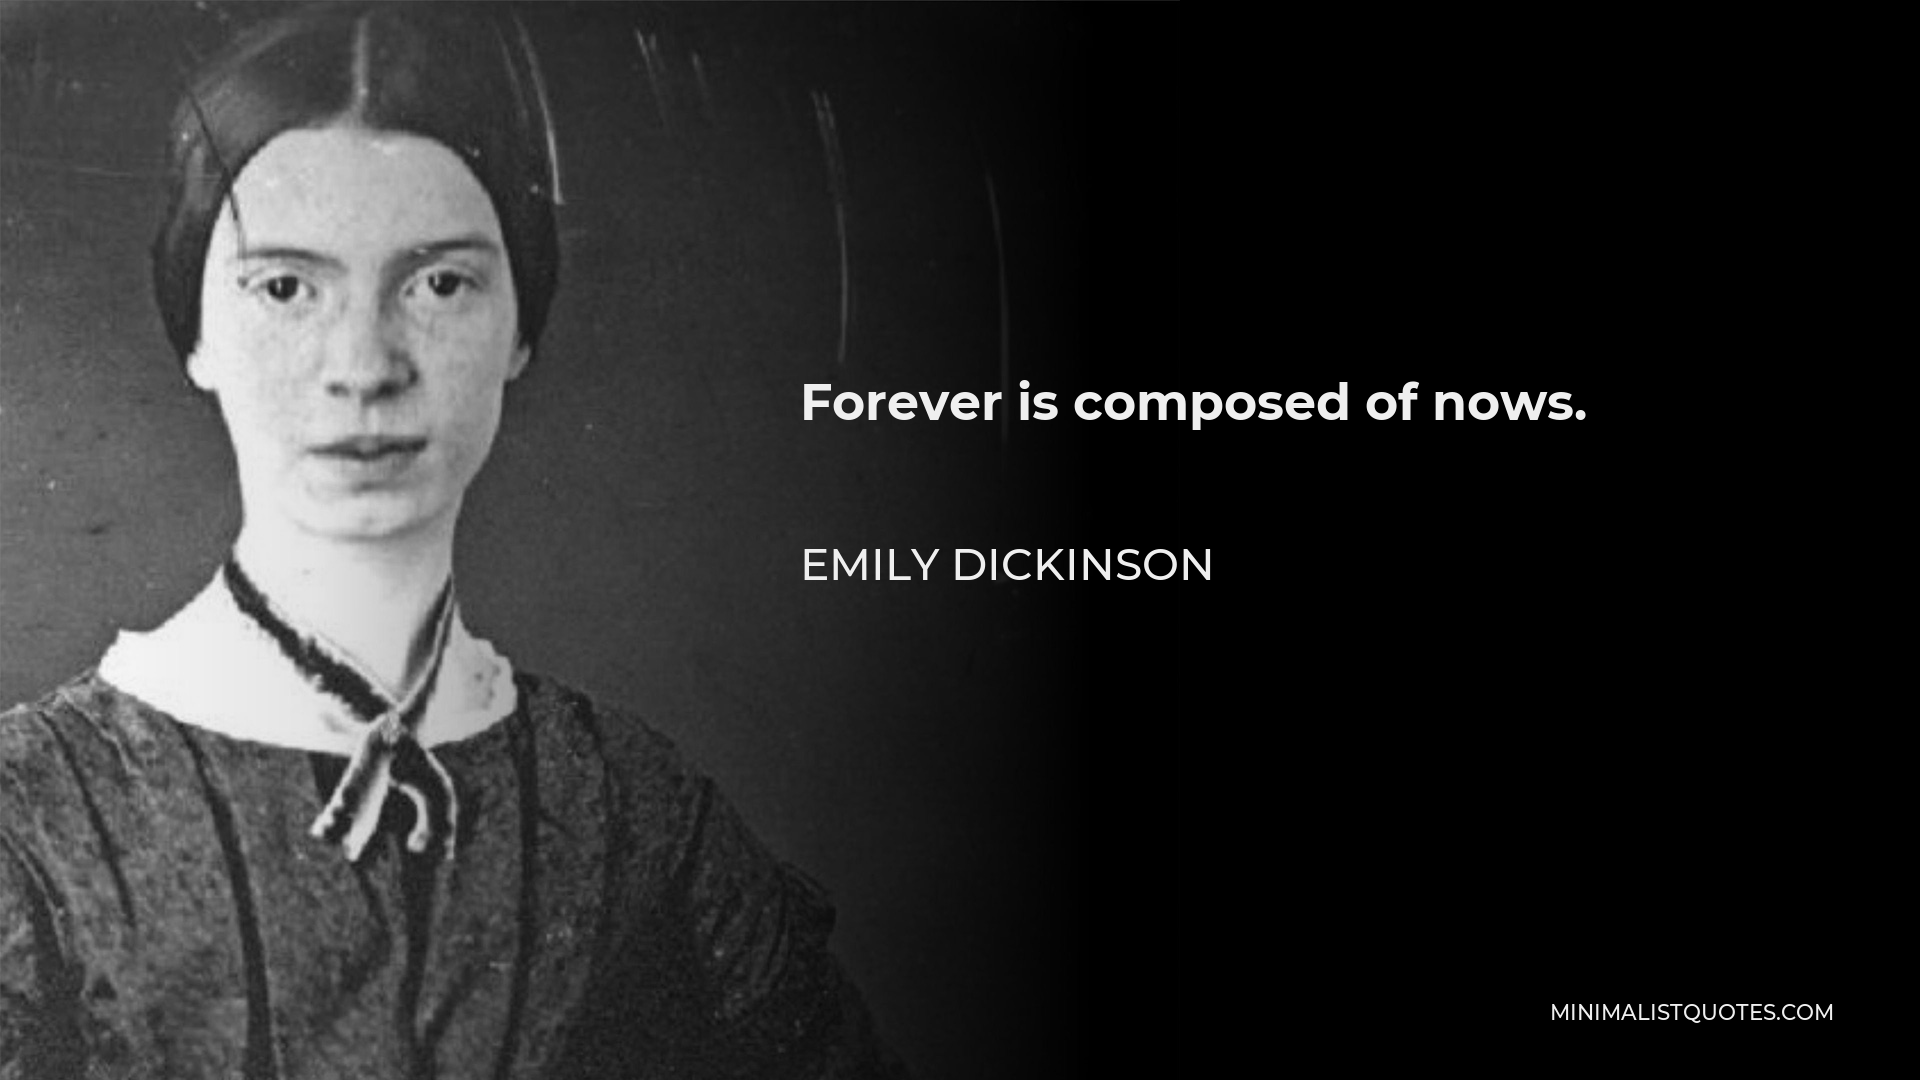 Emily Dickinson Quote - Forever is composed of nows.